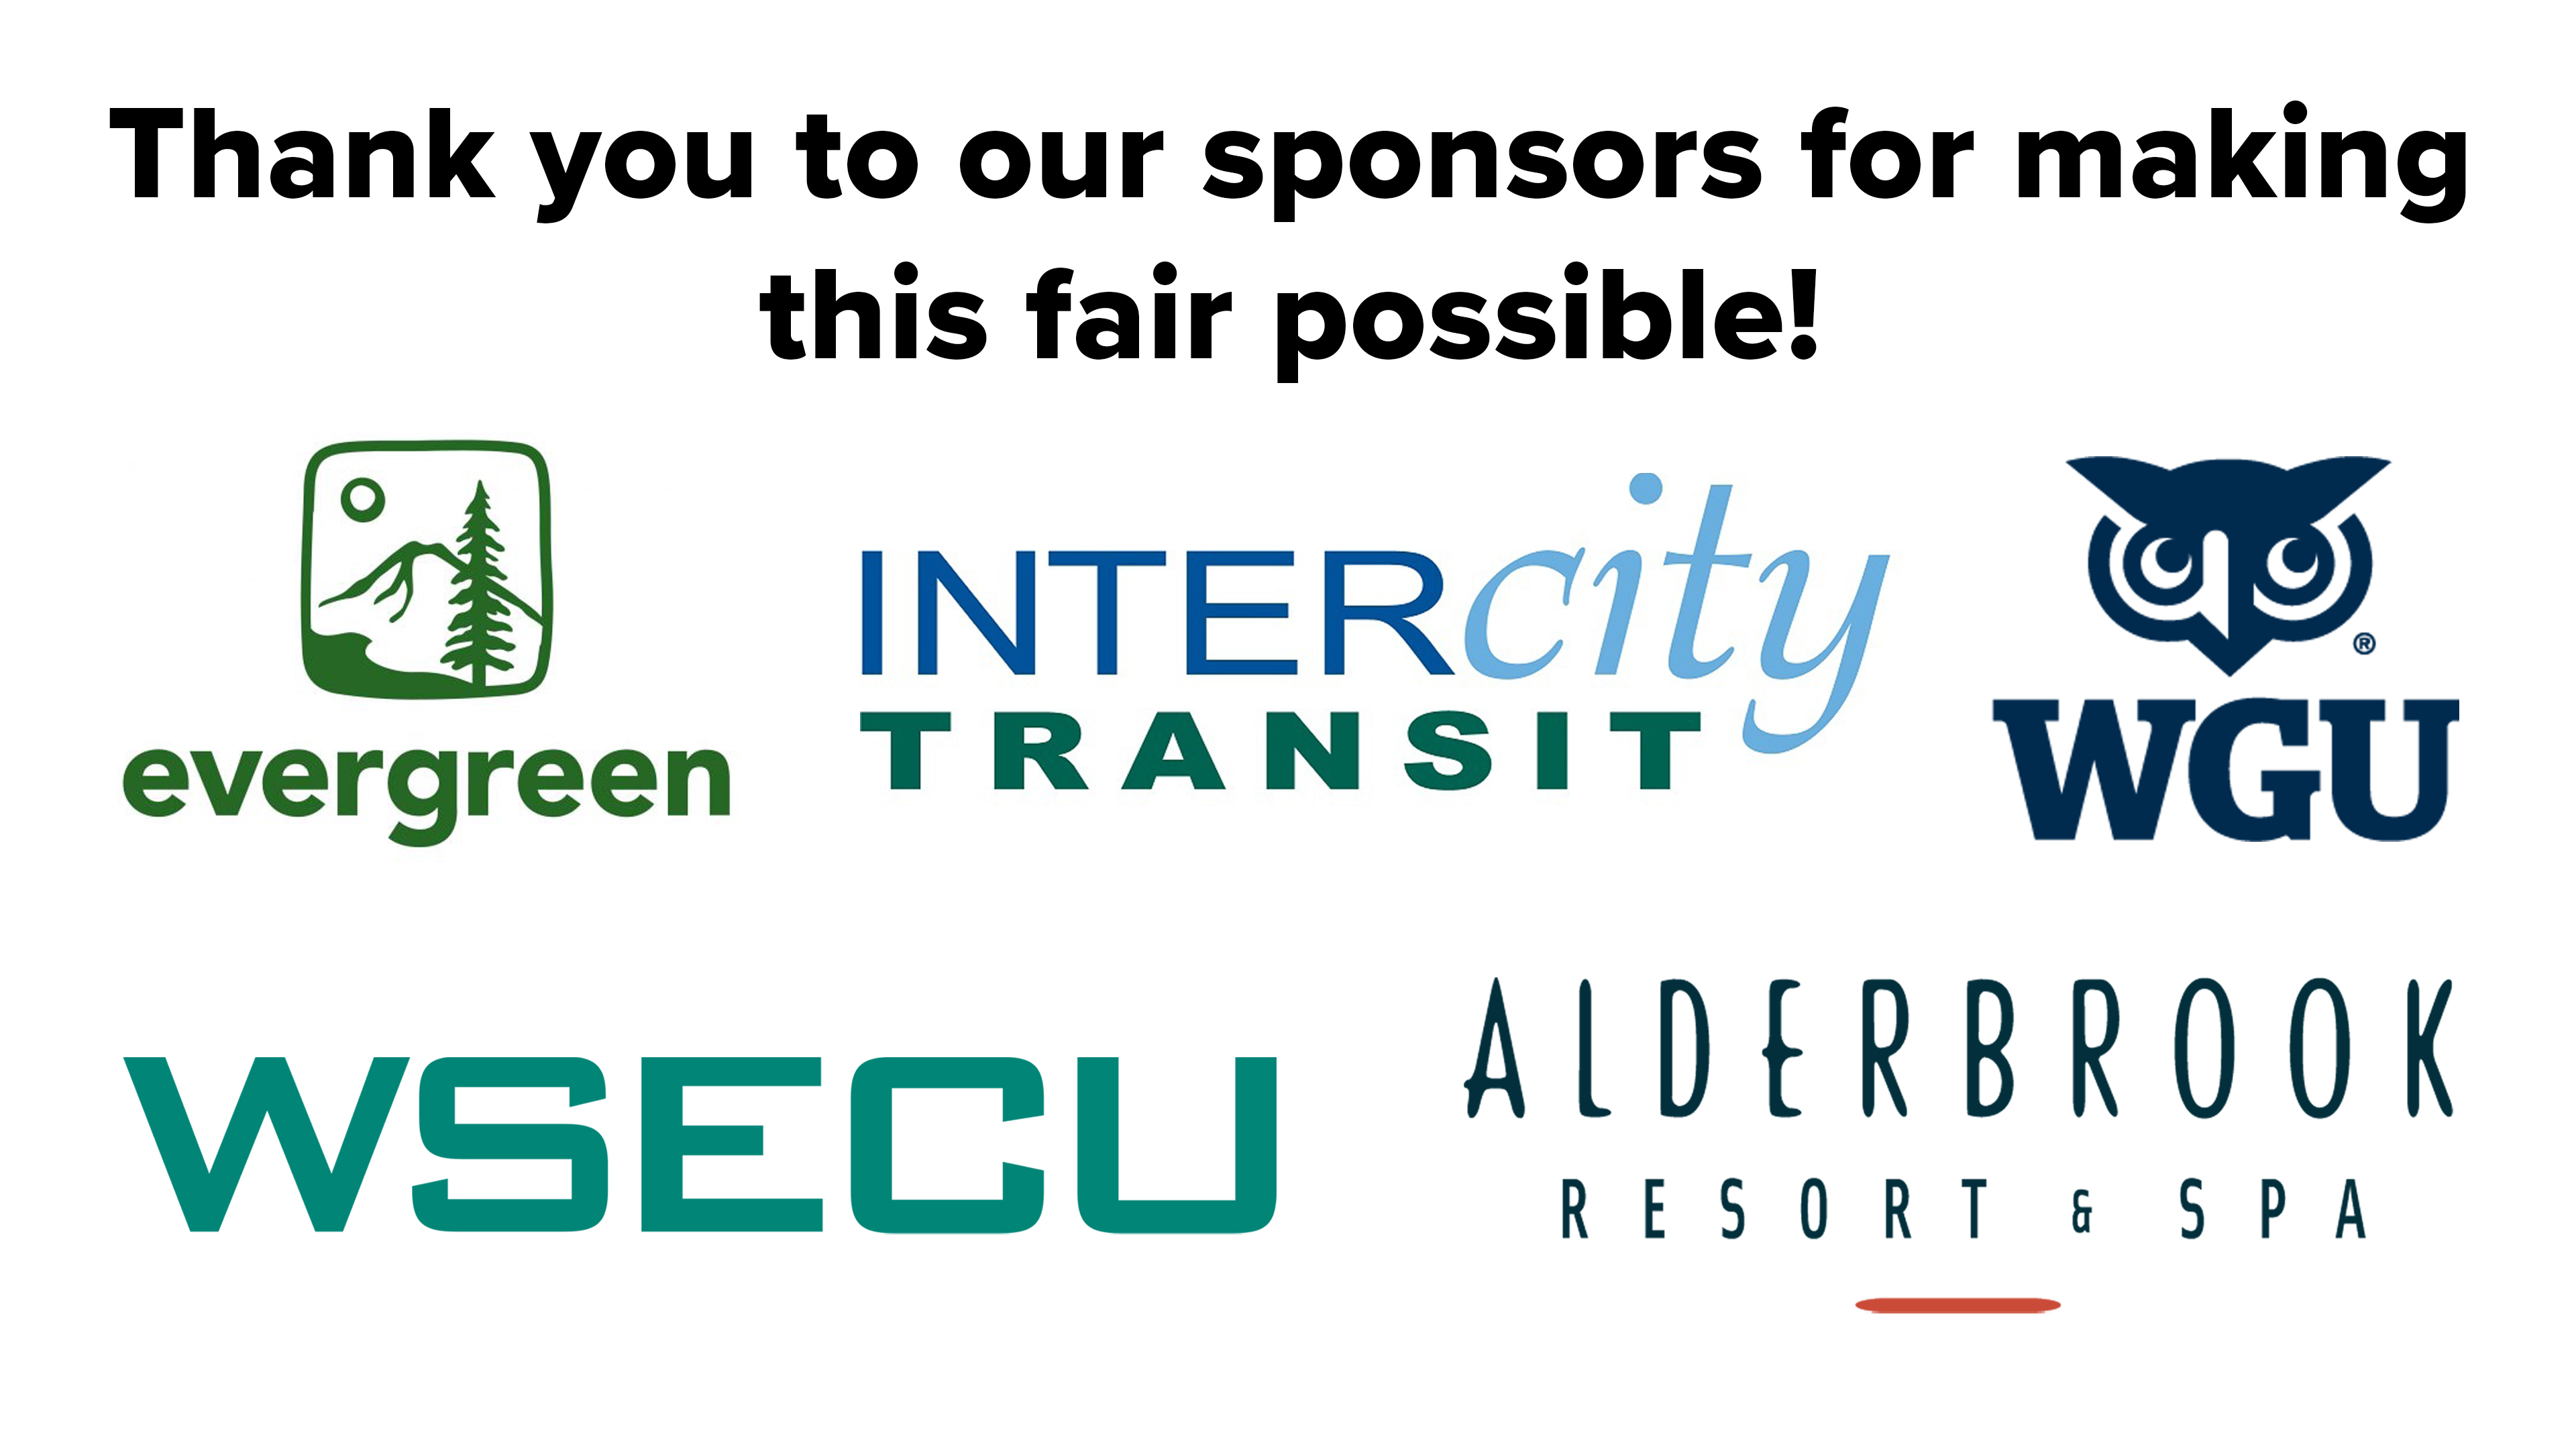 Thank you to our sponsors for making this fair possible! The Evergreen State College, Intercity Transit, Western Governors University, WSECU, and Alderbrook Resort & Spa